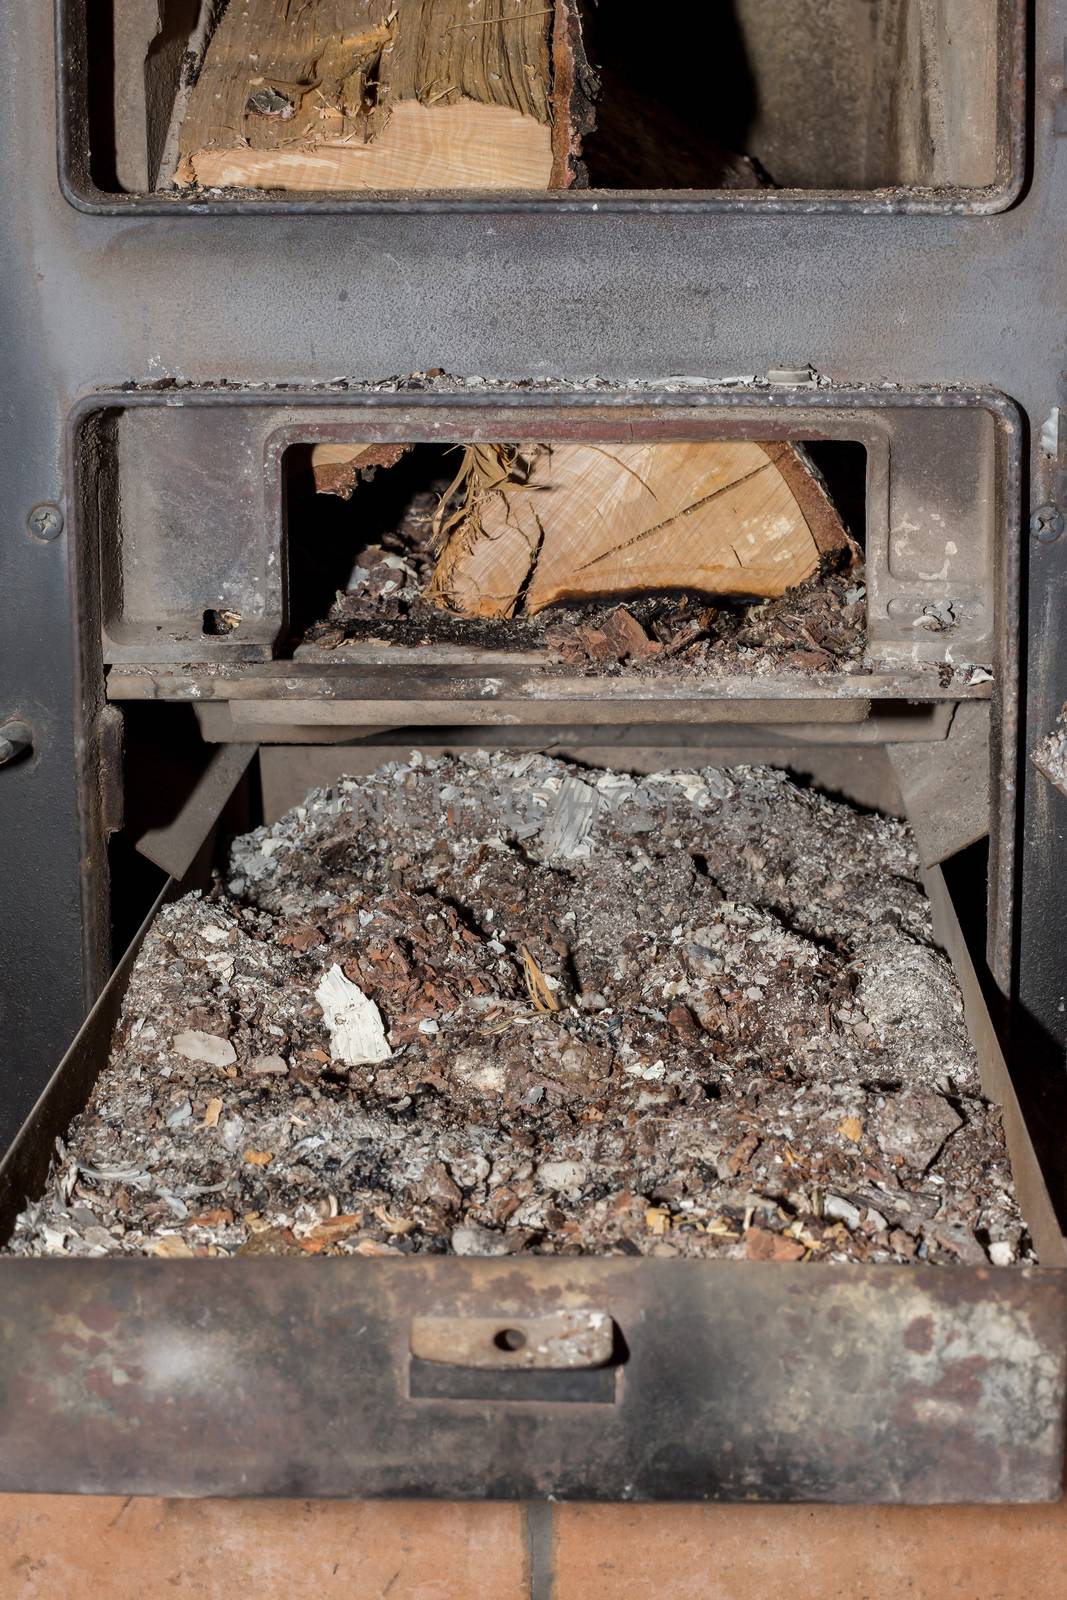 A box full of ashes under the fireplace